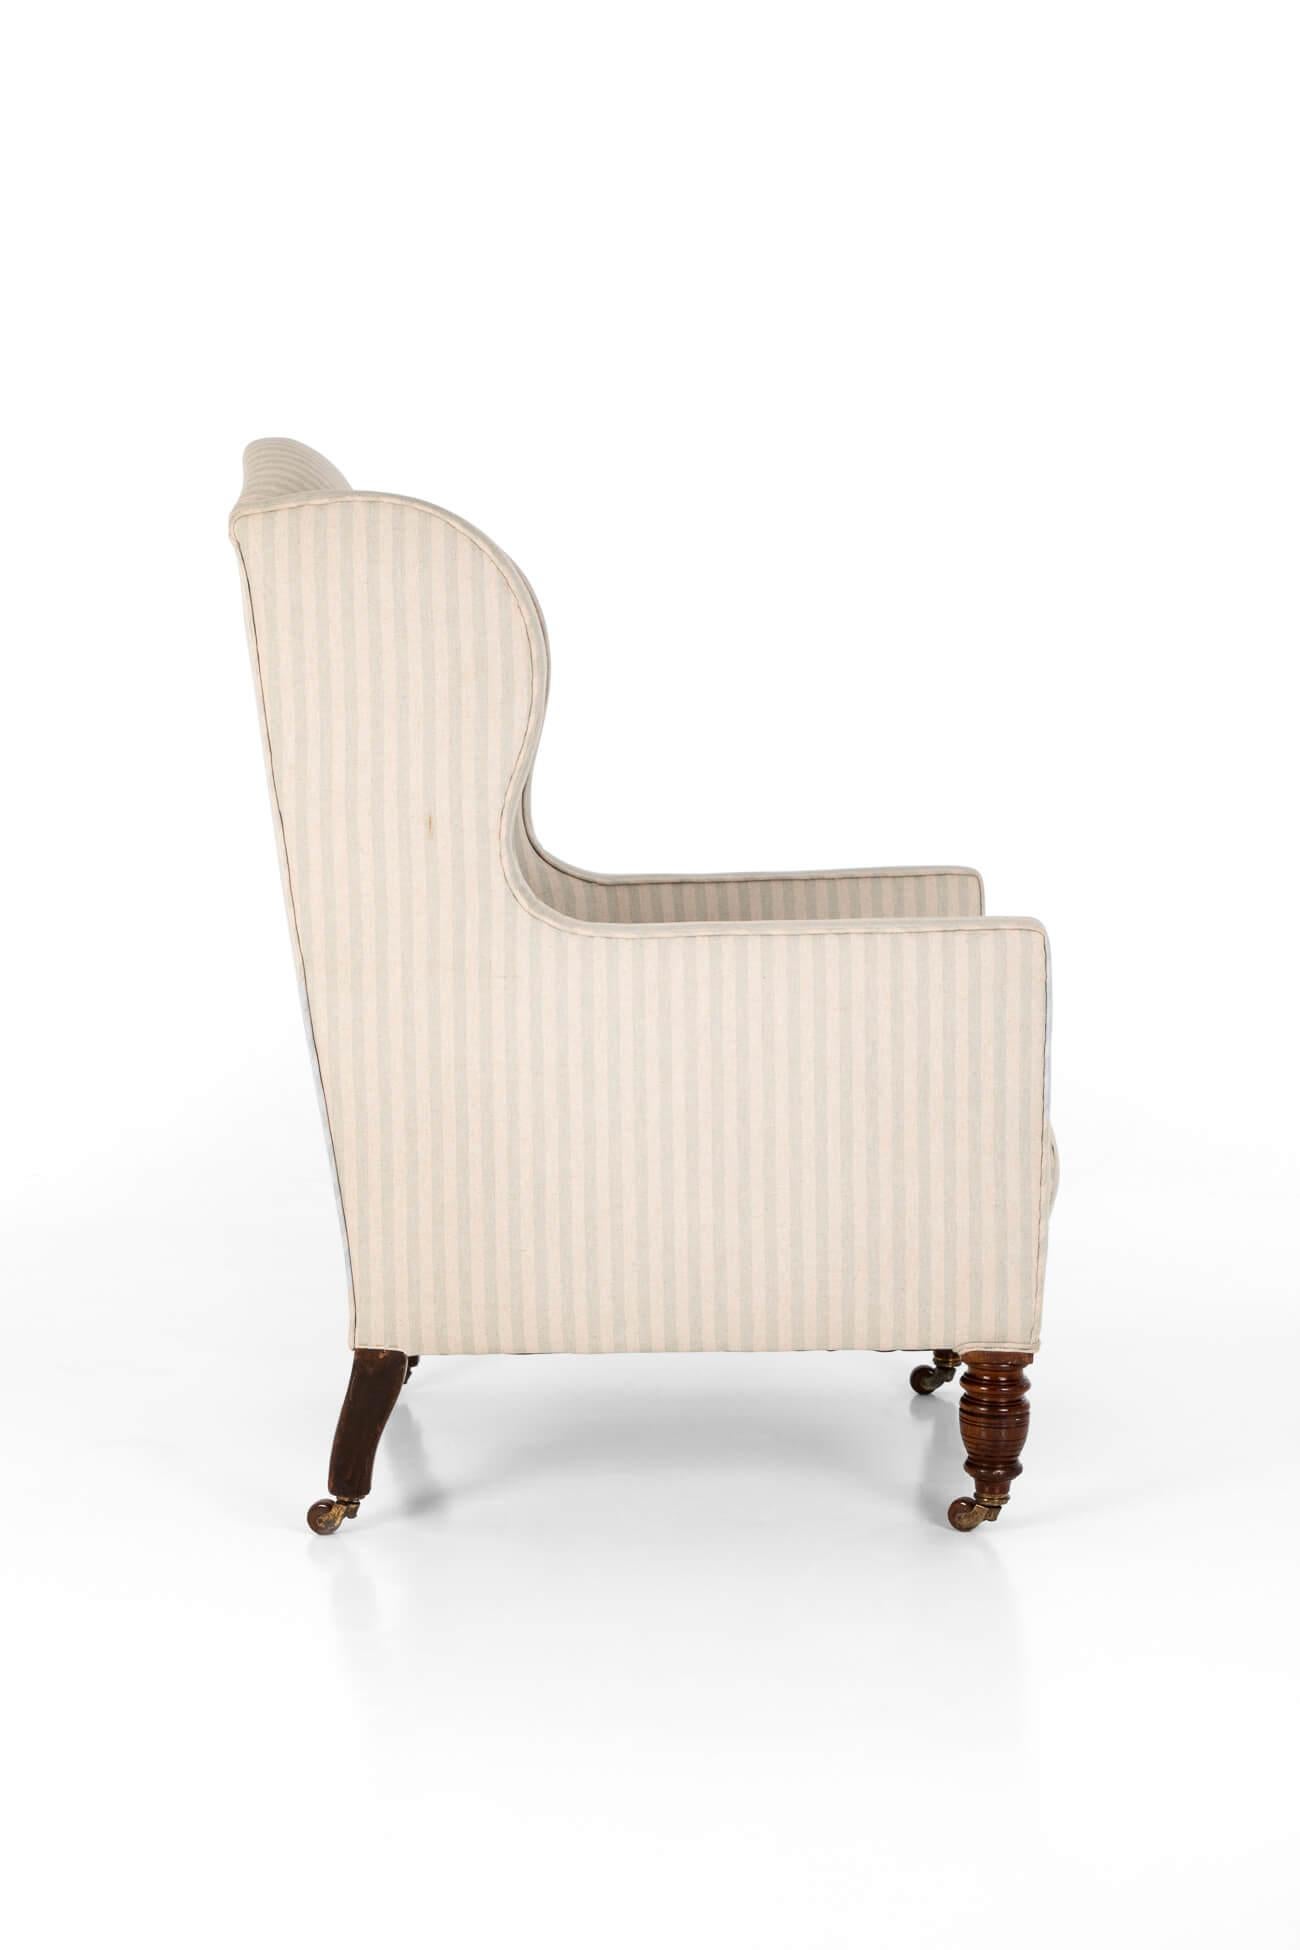 Hand-Crafted Cornelius V. Smith Wingback Armchair For Sale